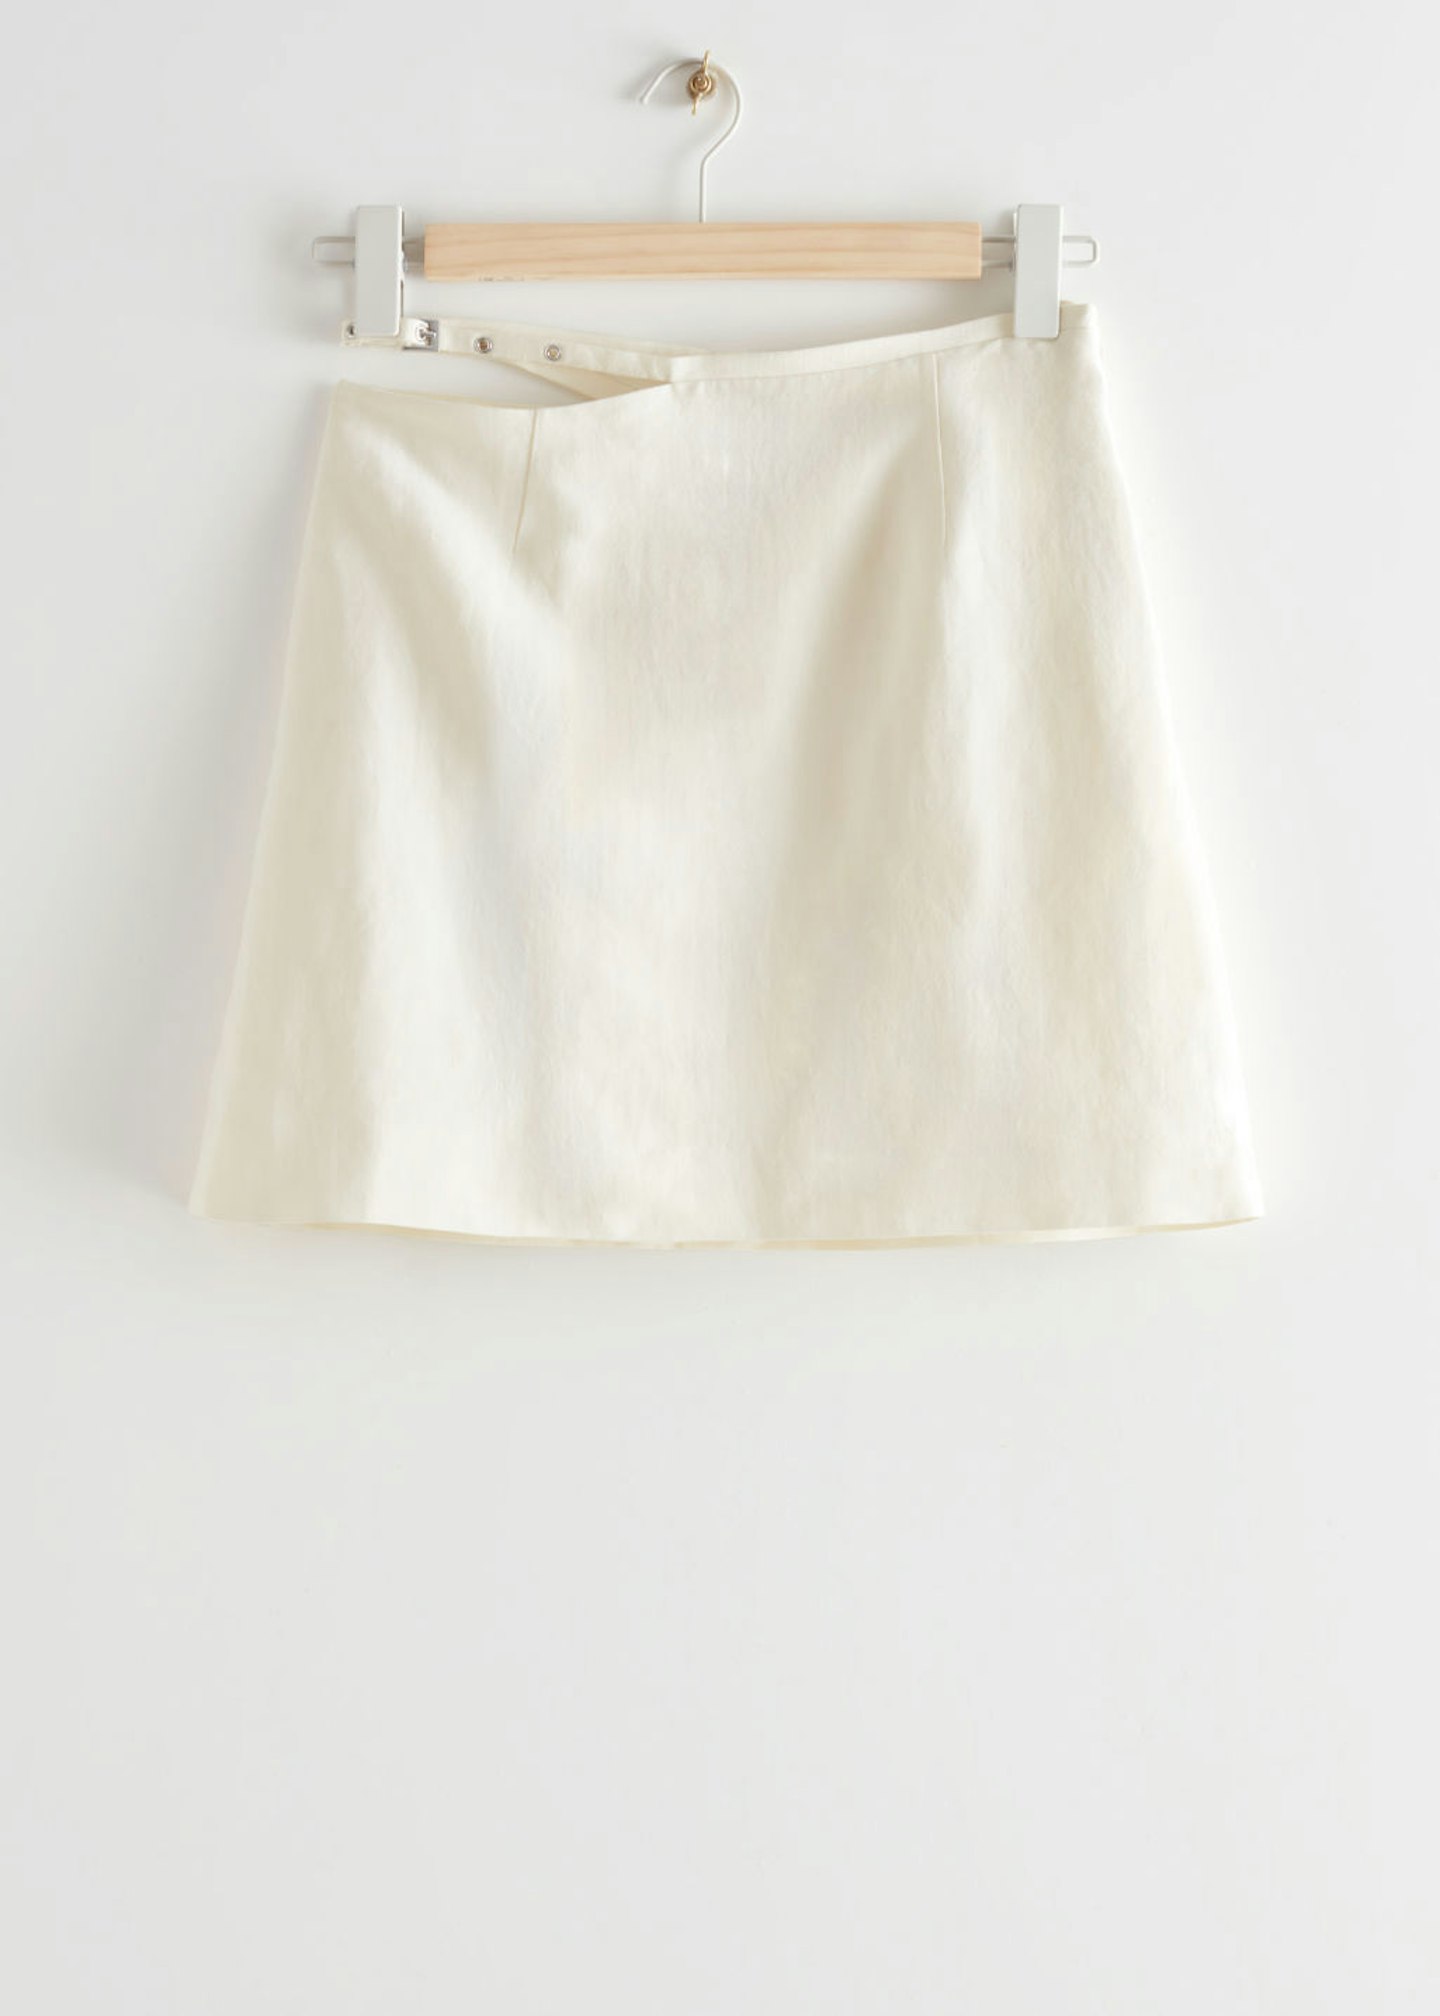 & Other Stories, Cut-Out Mini Skirt, £65